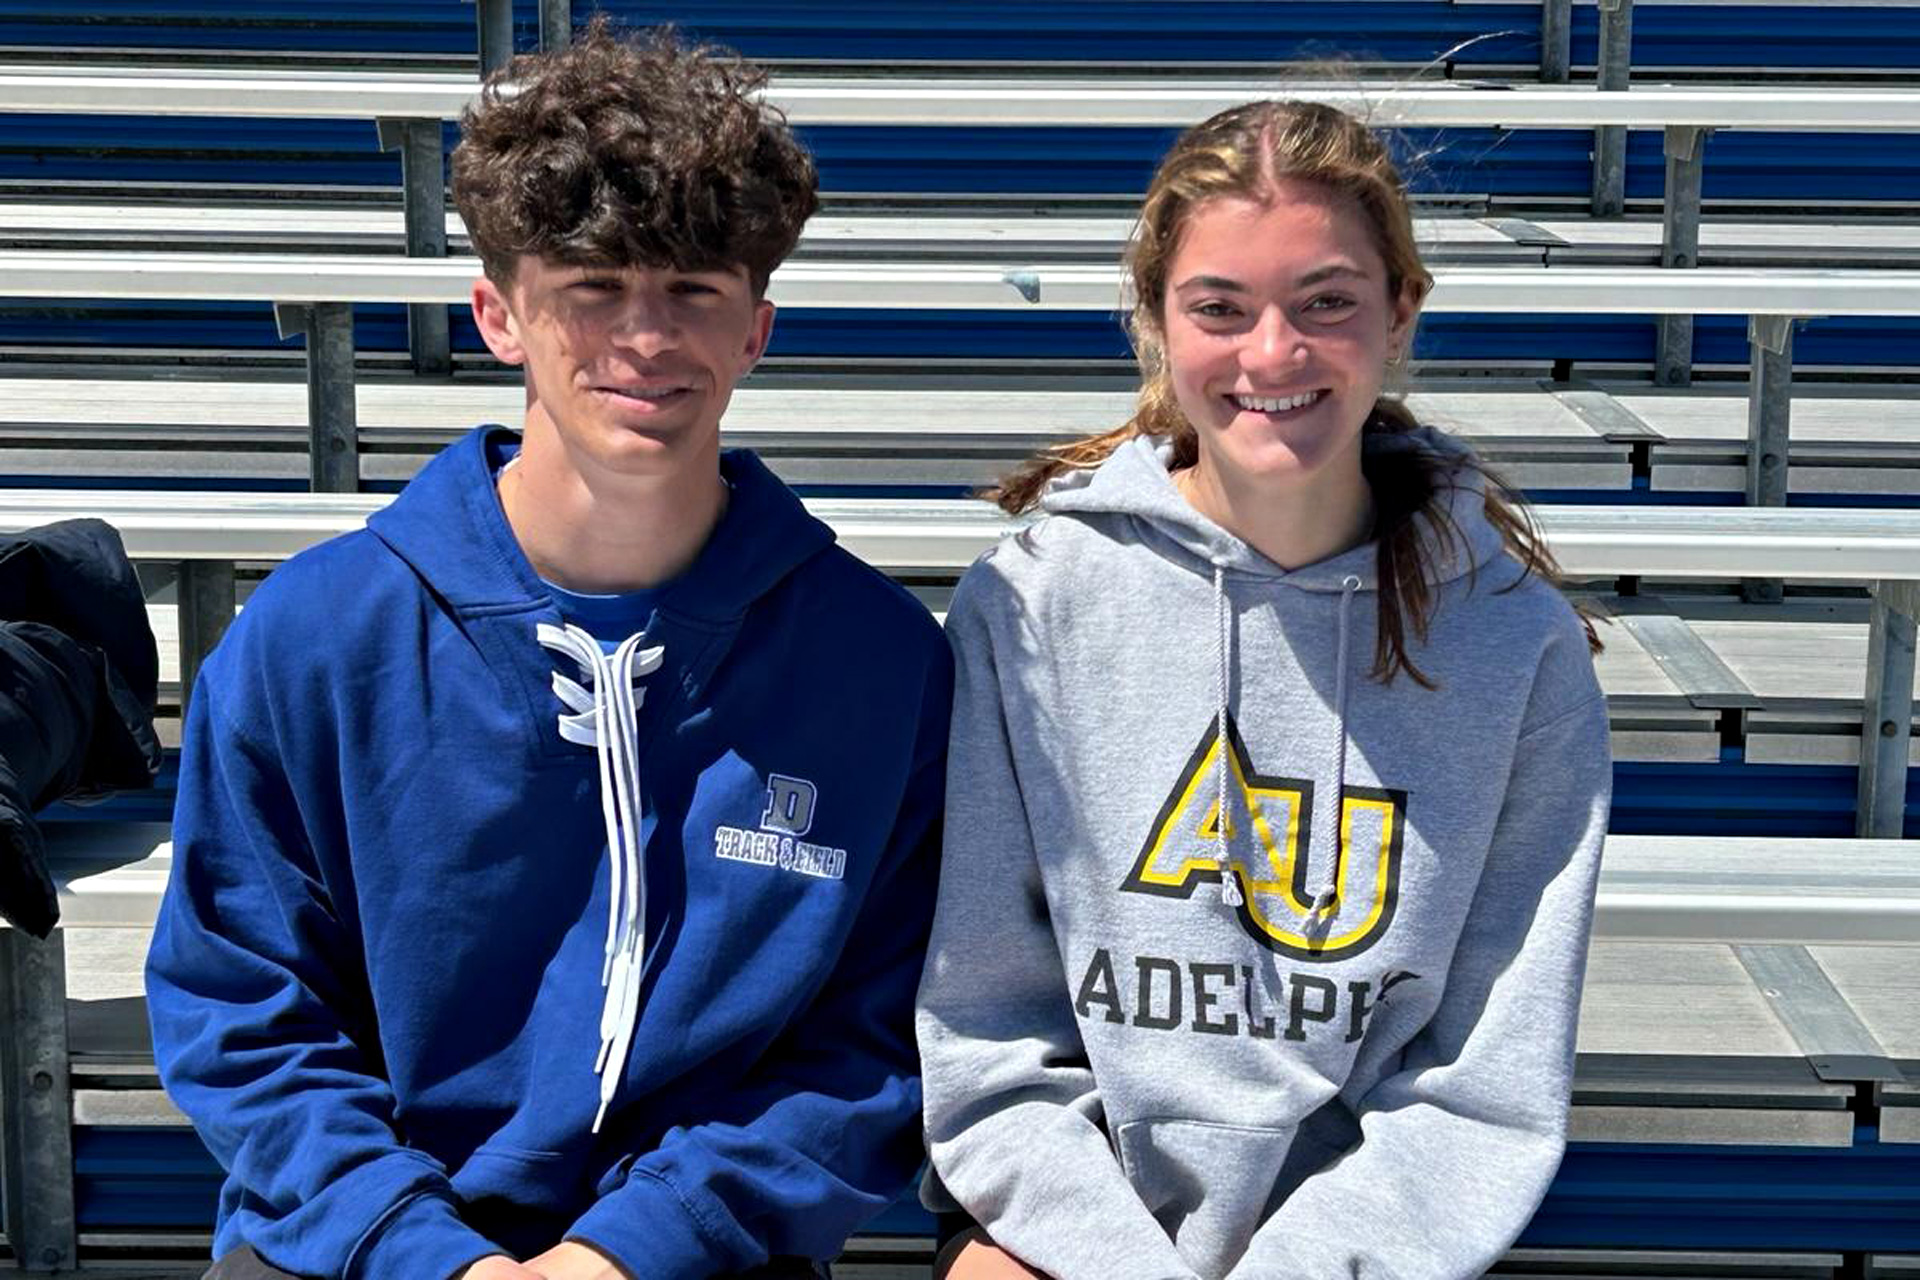 At the Nassau Coaches Invitational last Saturday Natalie Longobucco of MacArthur was named Most Outstanding Female Athlete of the Meet and Joseph Mohaupt of Division was named Most Outstanding Male Athlete of the meet. Natalie won the 100m, 400m and anchored the winning 4x400m.  Joseph won the 200m and 400m.